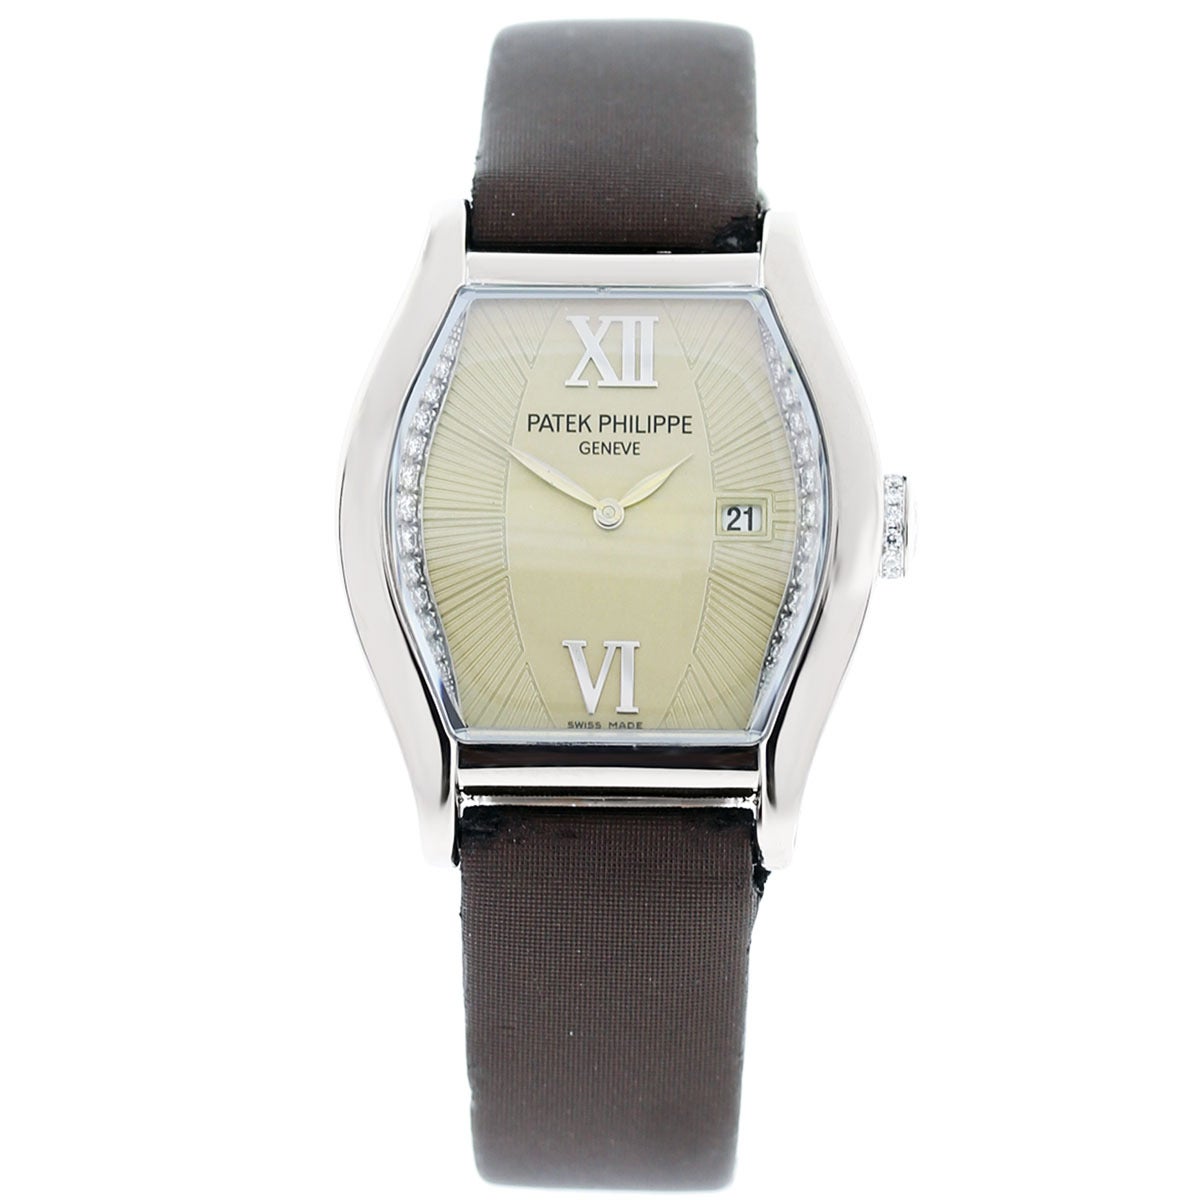 Brand: Patek Philippe
Model: Vintage Style 4949G
Material: 18k White  Gold
Dial: Champagne dial
Case Measurements: 30 x 37 mm
Bracelet: Patek Satin Band
Movement: Quartz
Additional Details: Comes Complete with Raymond Lee Jewelers